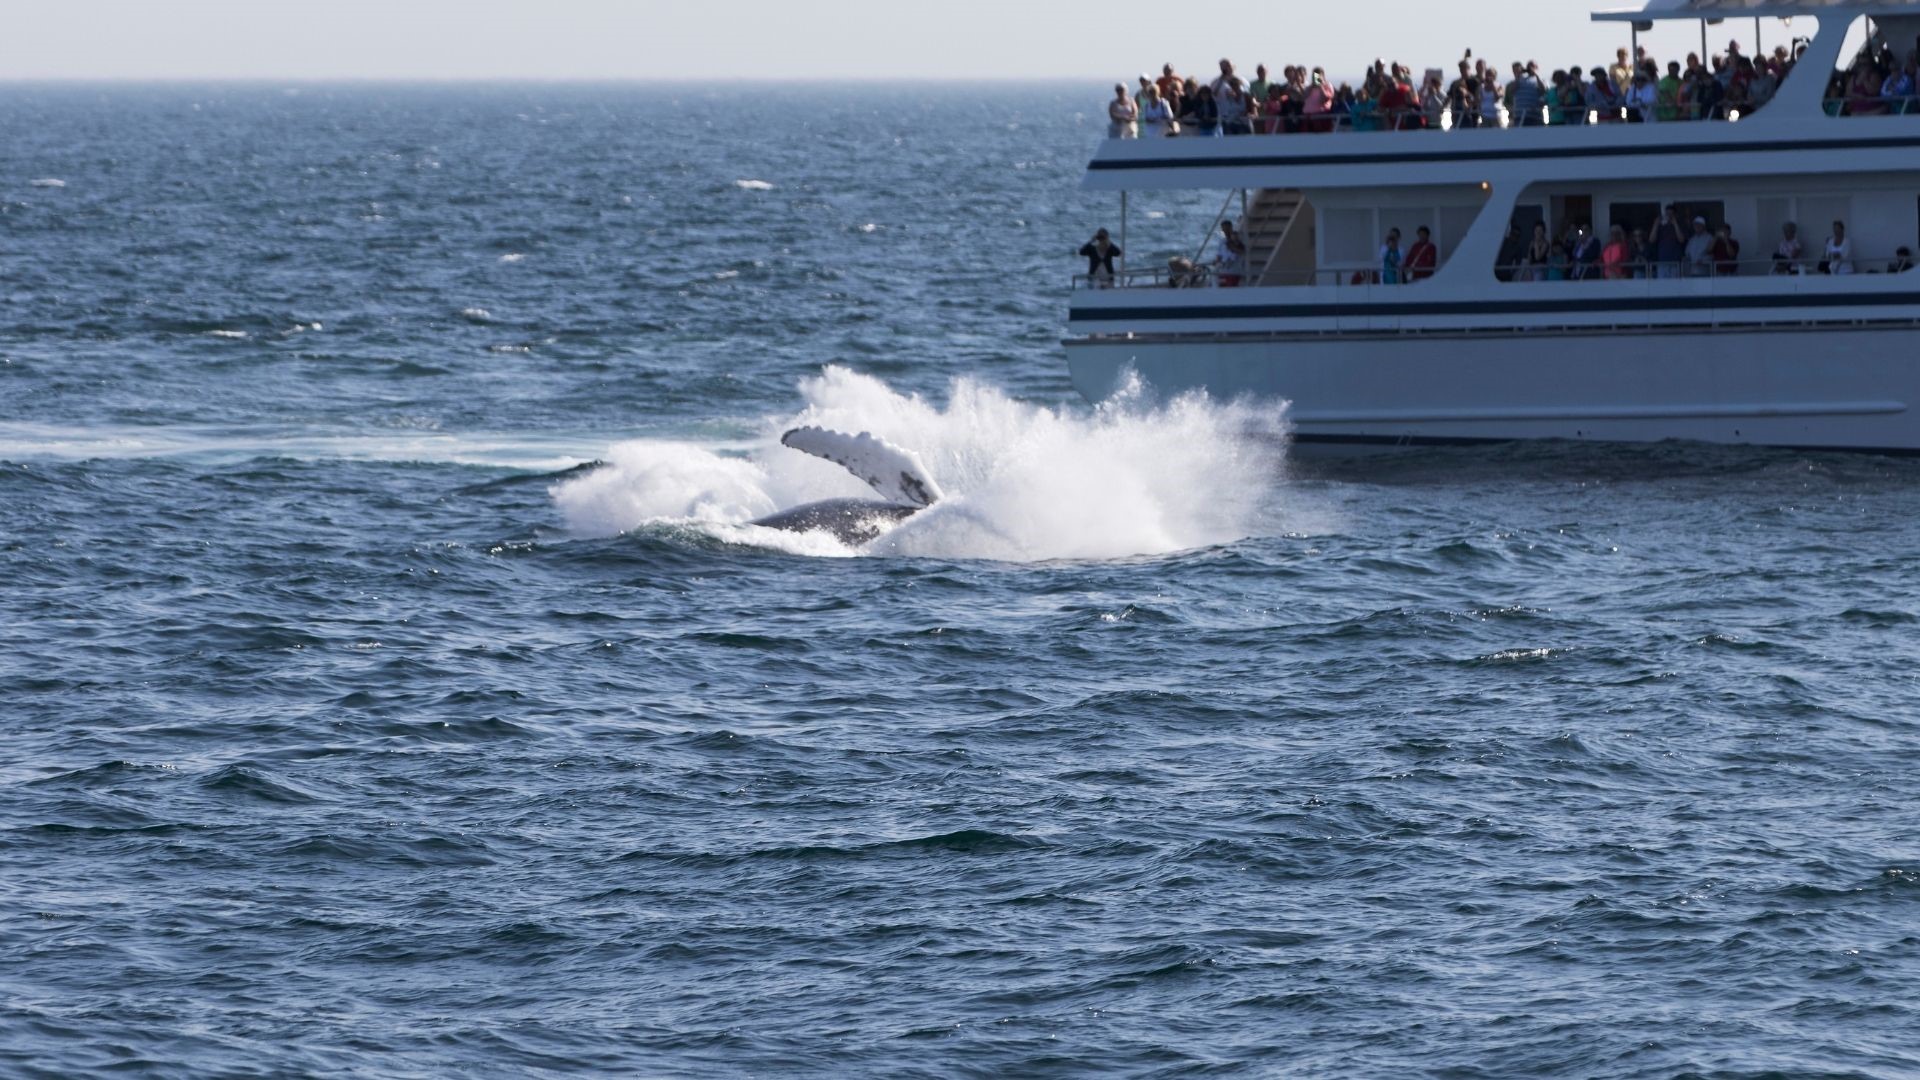 Whale watching tour boat with whale breaching the water